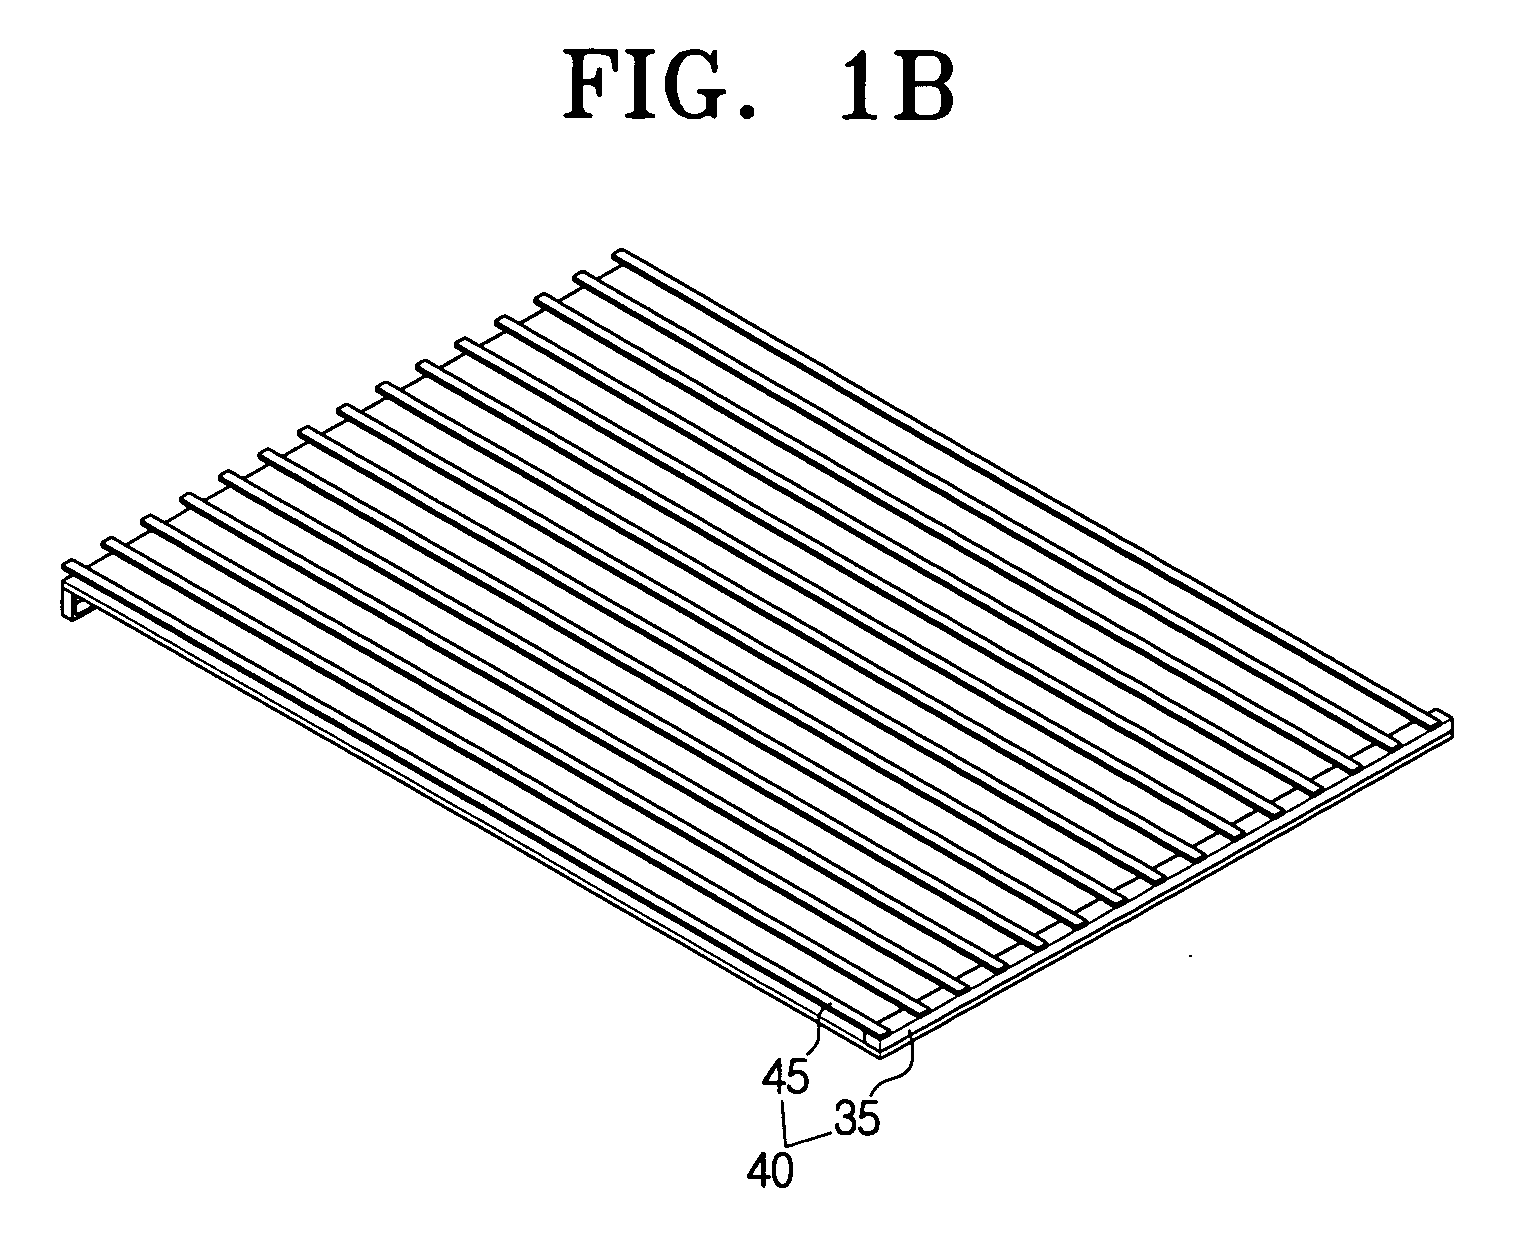 Mobile terminal and mobile terminal antenna for reducing electromagnetic waves radiated towards human body